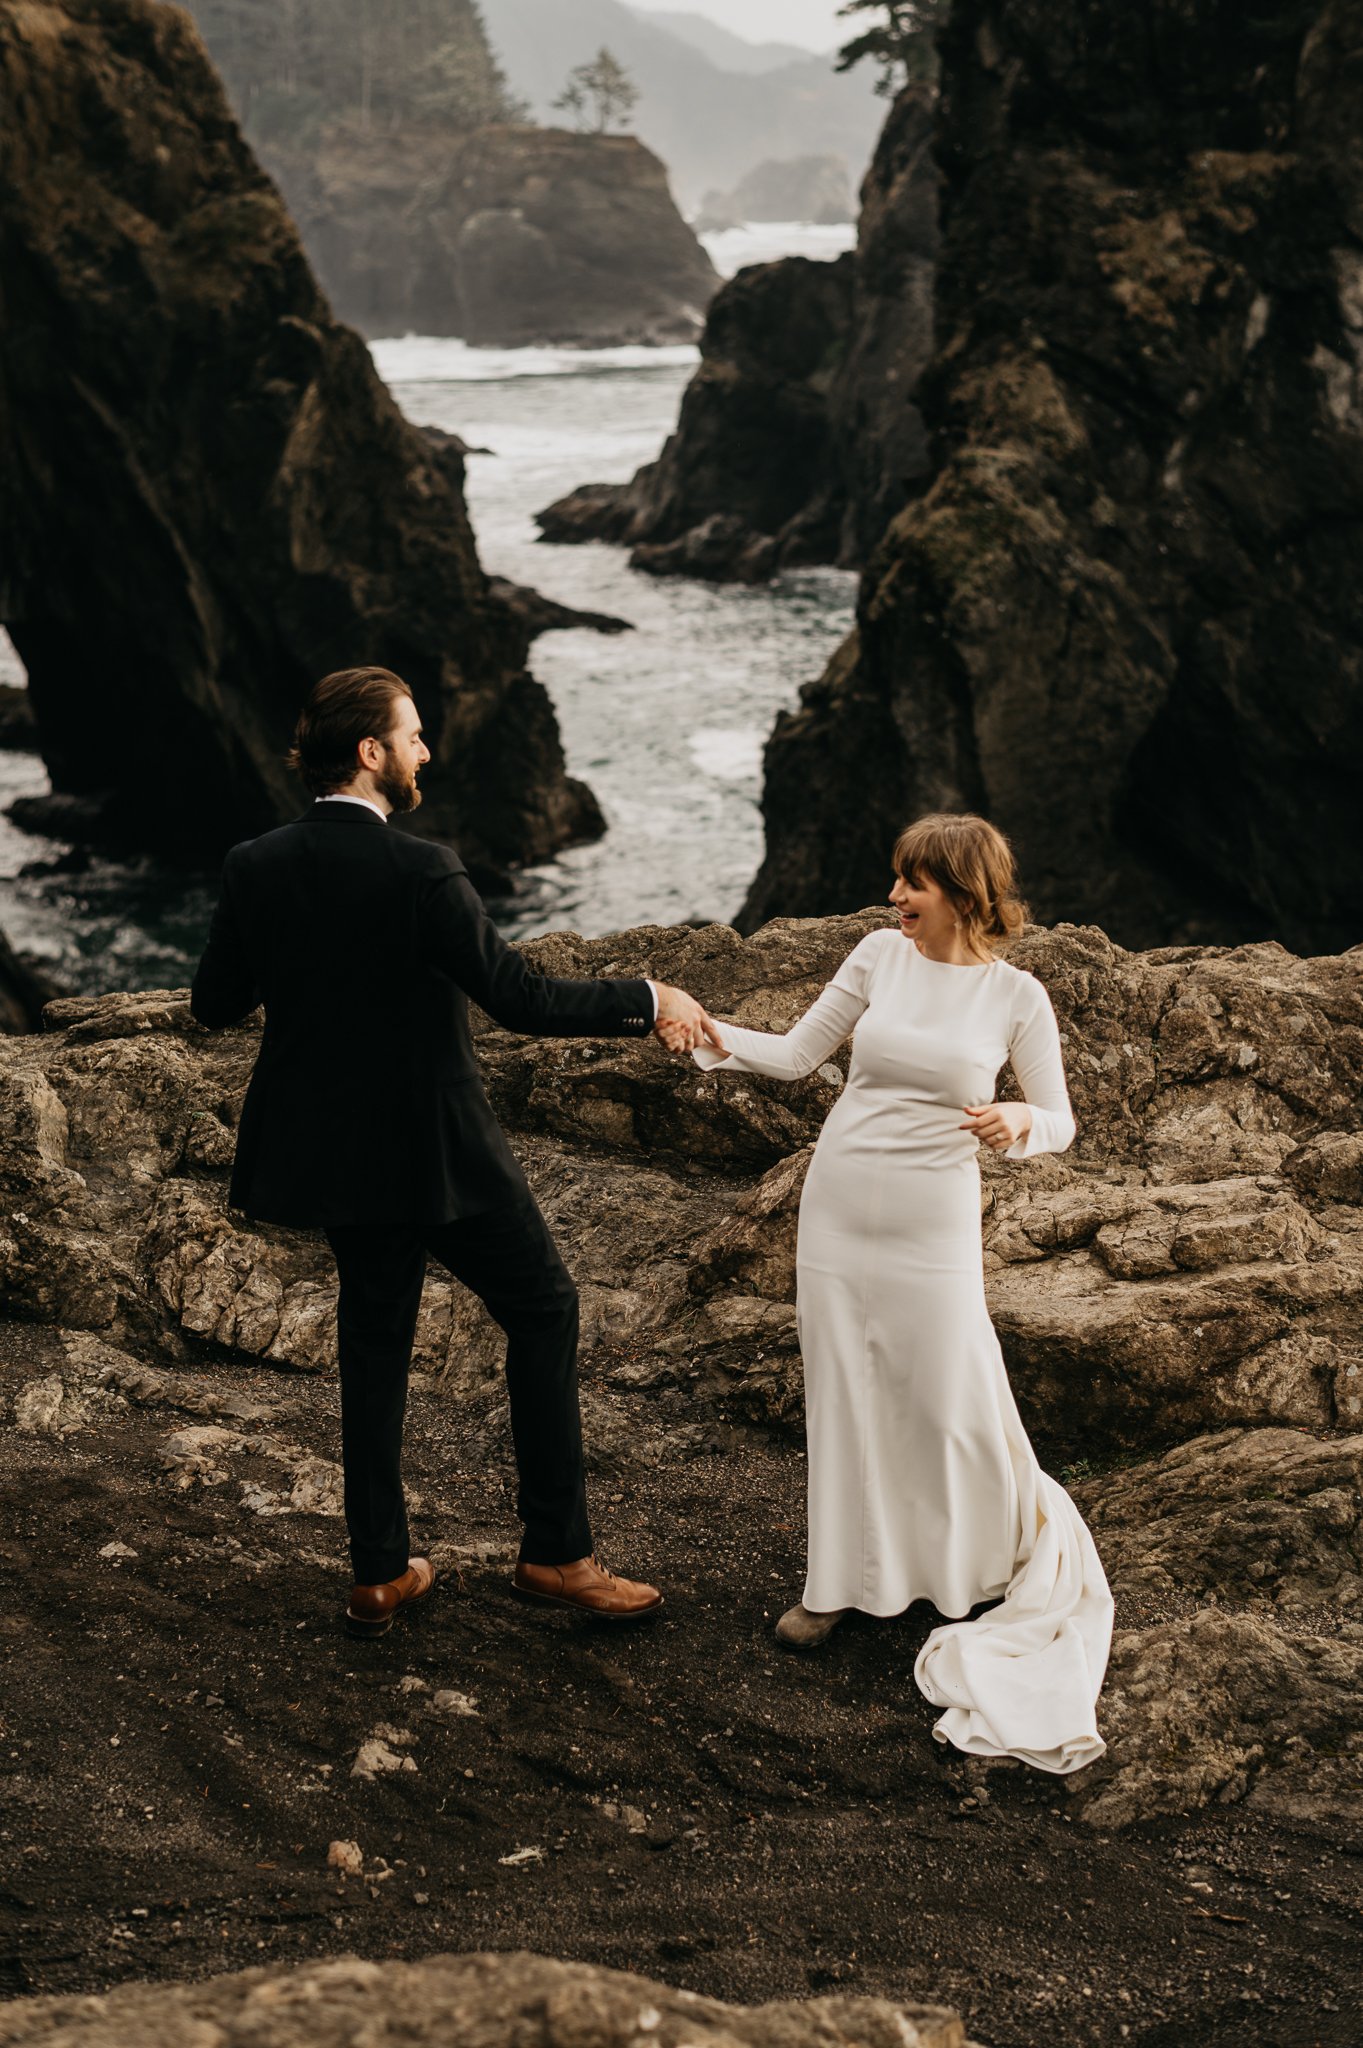 Bride and groom in wedding attire dancing on cliff with the cliffs and ocean in background